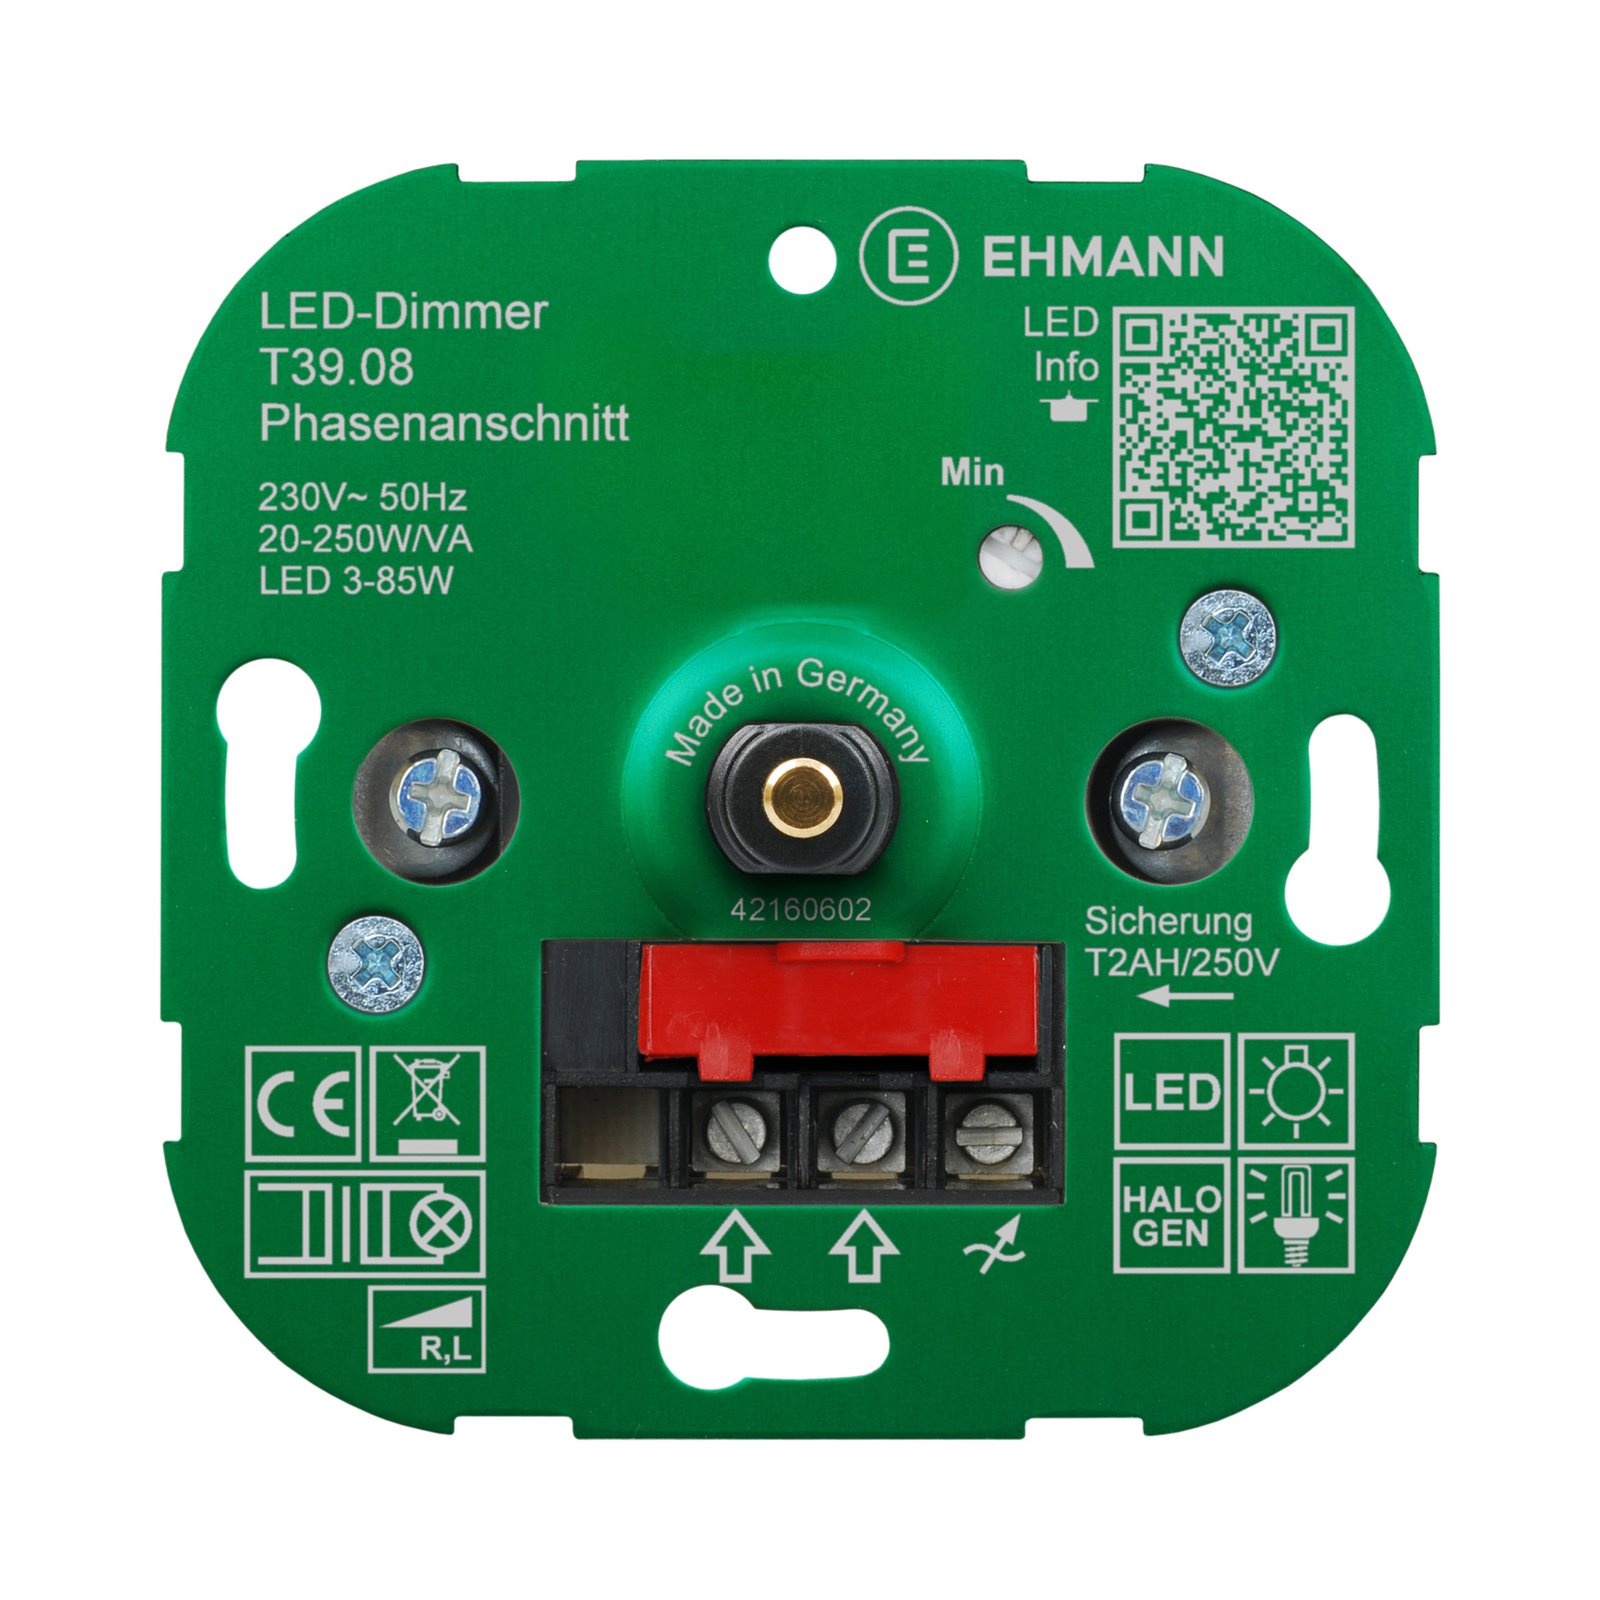 EHMANN T39 dimmer LED fase inicial, 20 - 250 W